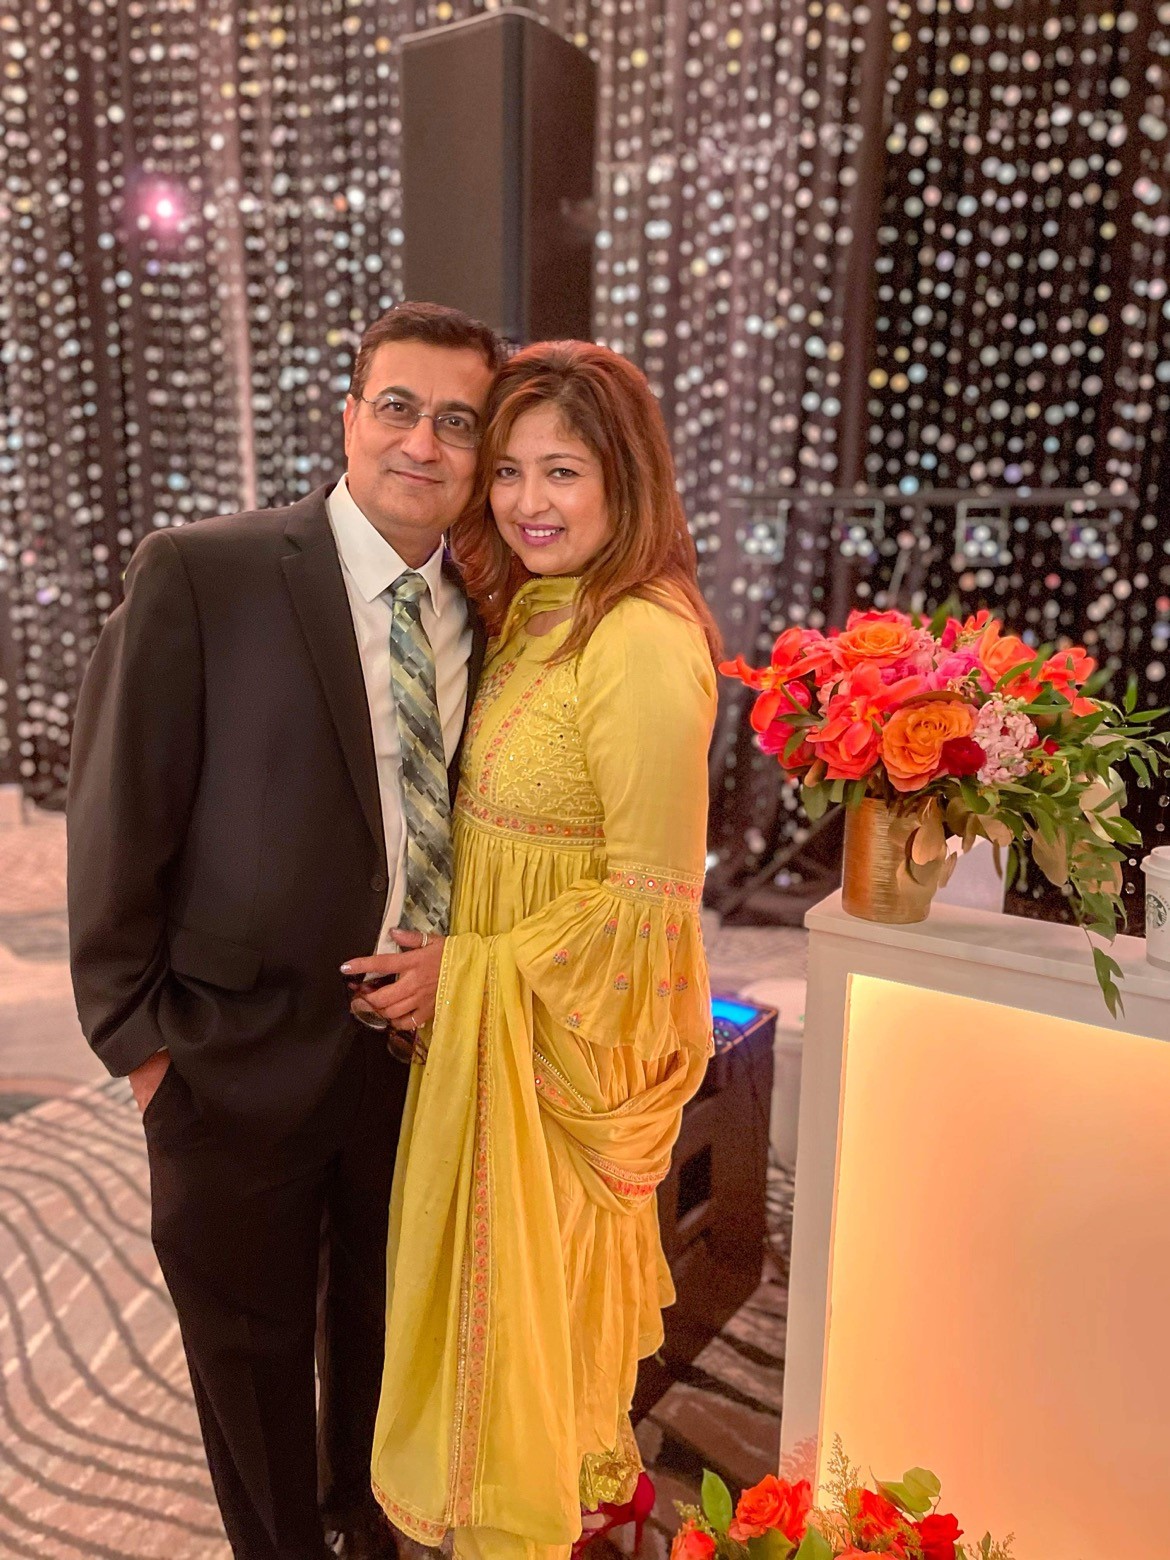 Mala B. and her husband, Dinesh, smile and pose together while wearing formal clothing at an event